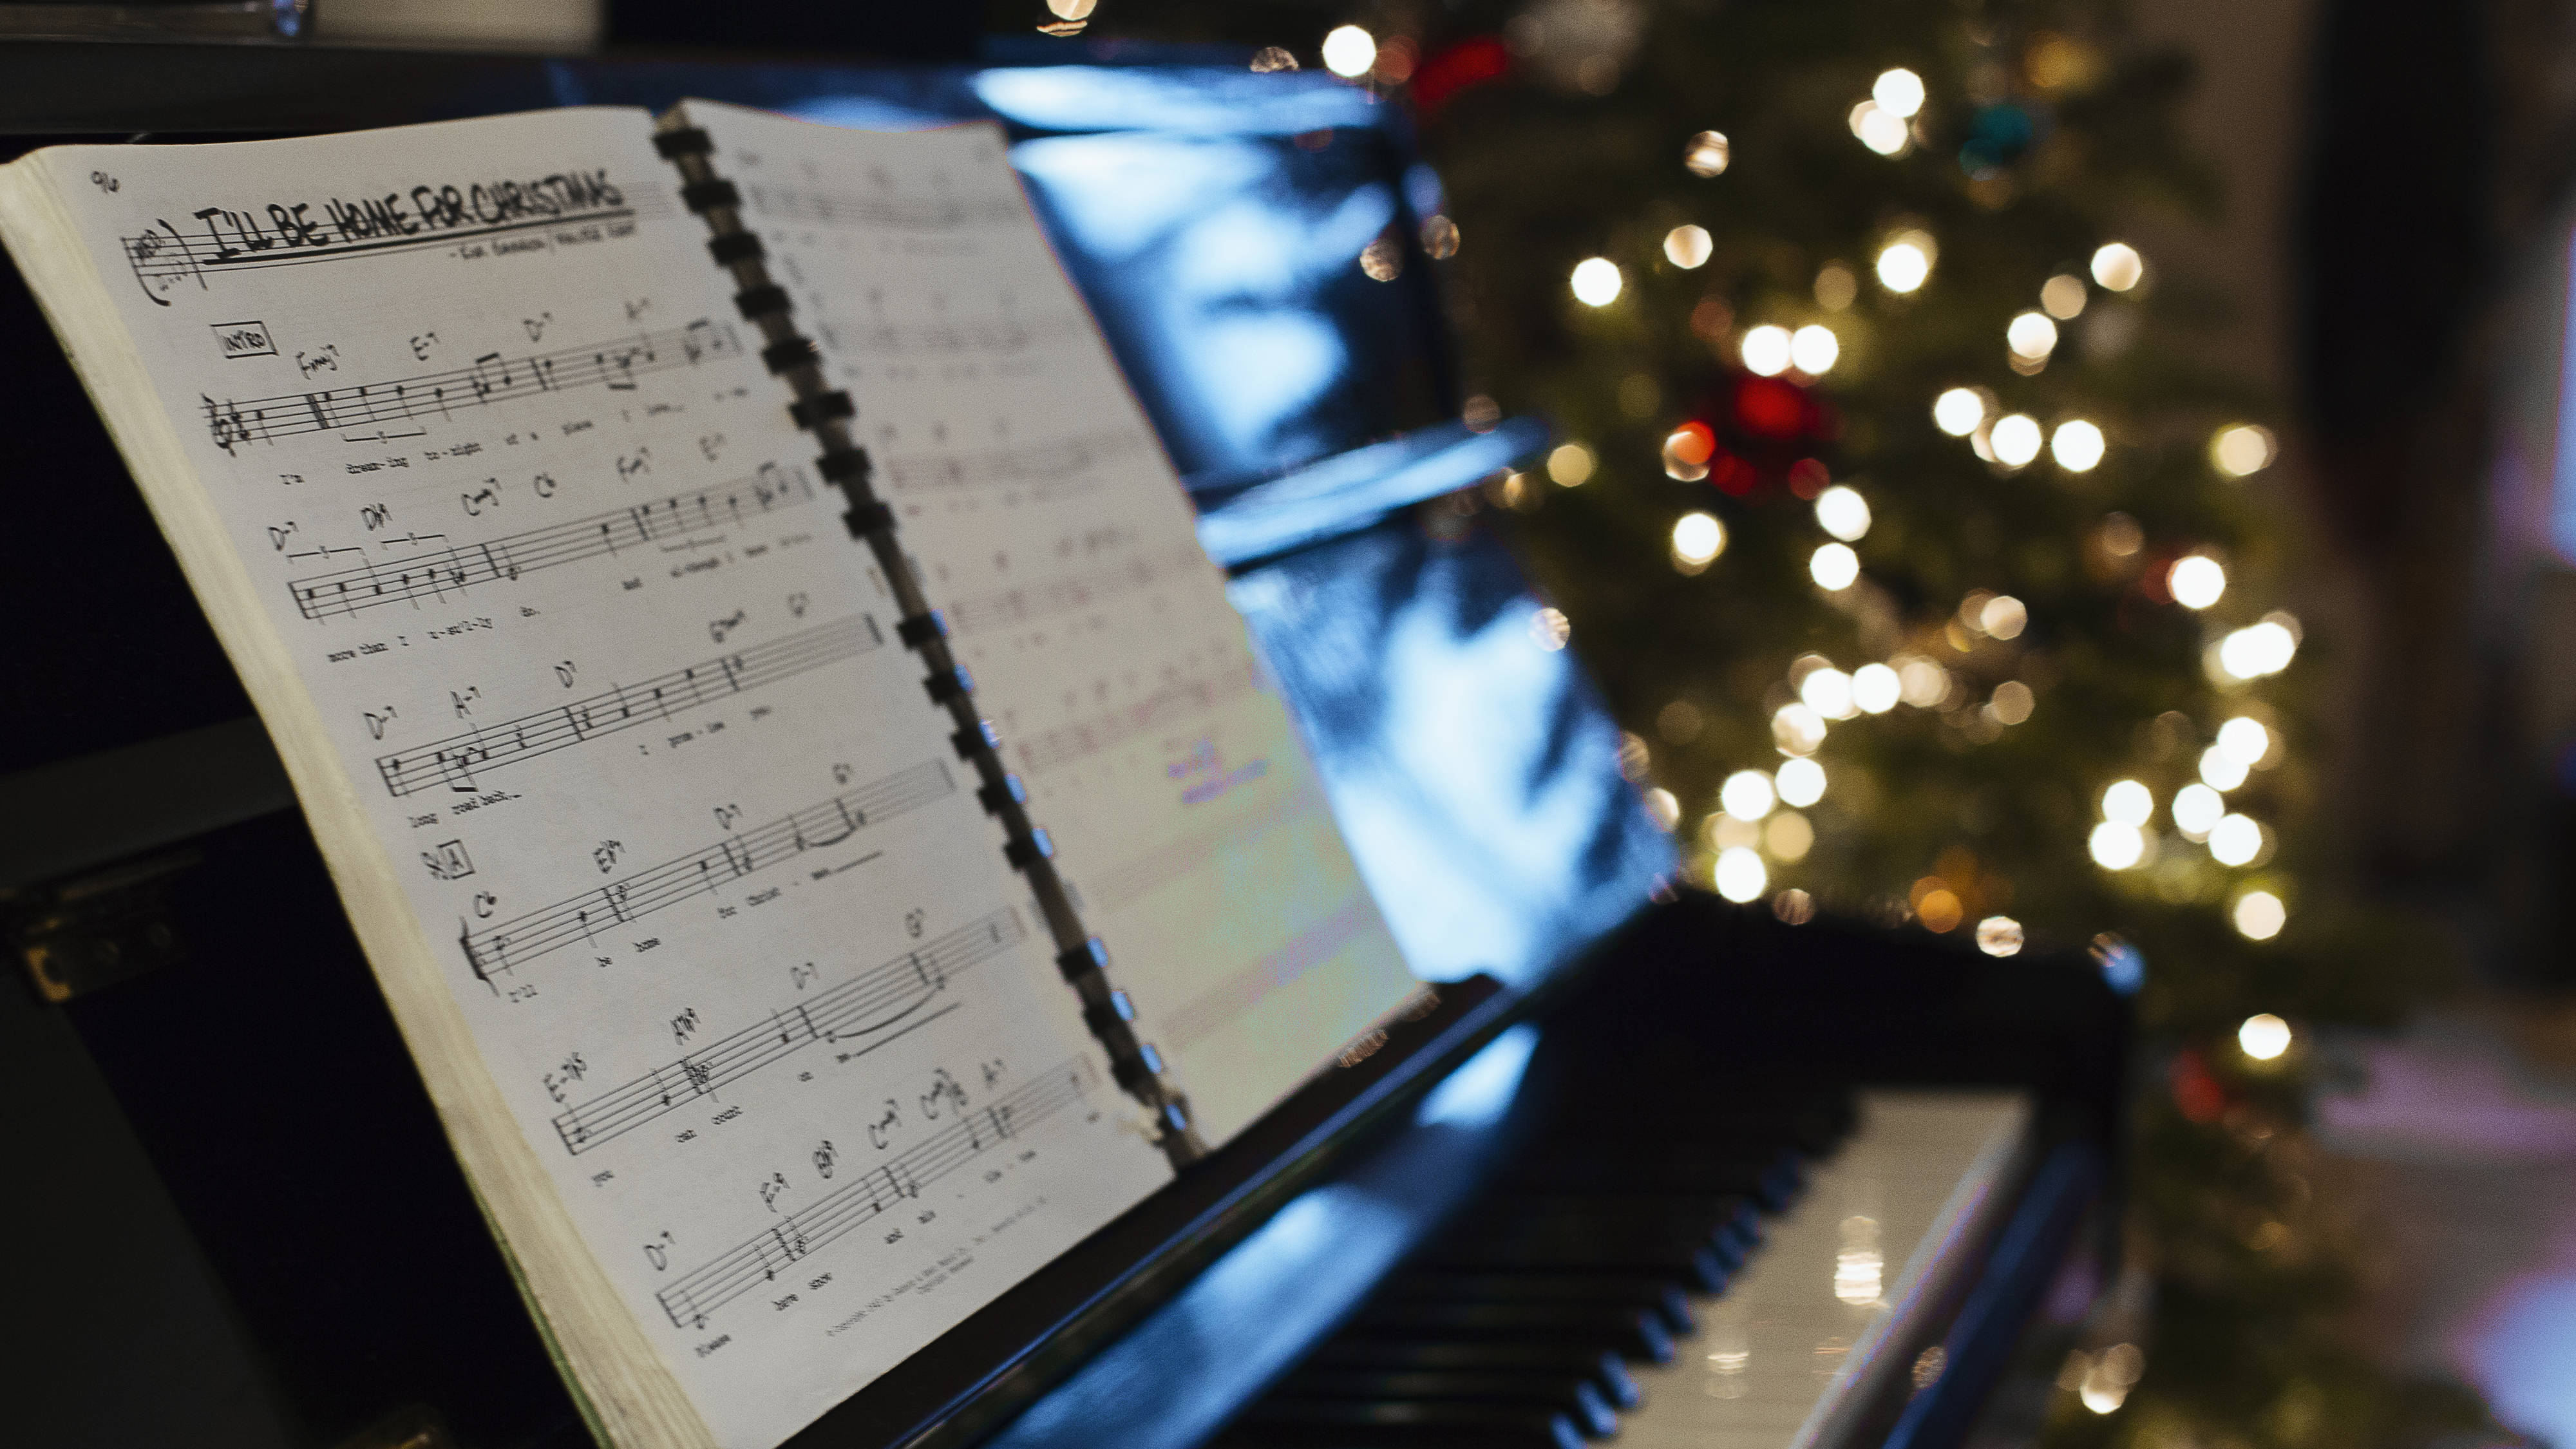 7 Of The Most Beautiful Christmas Pieces You Can Play On The Piano